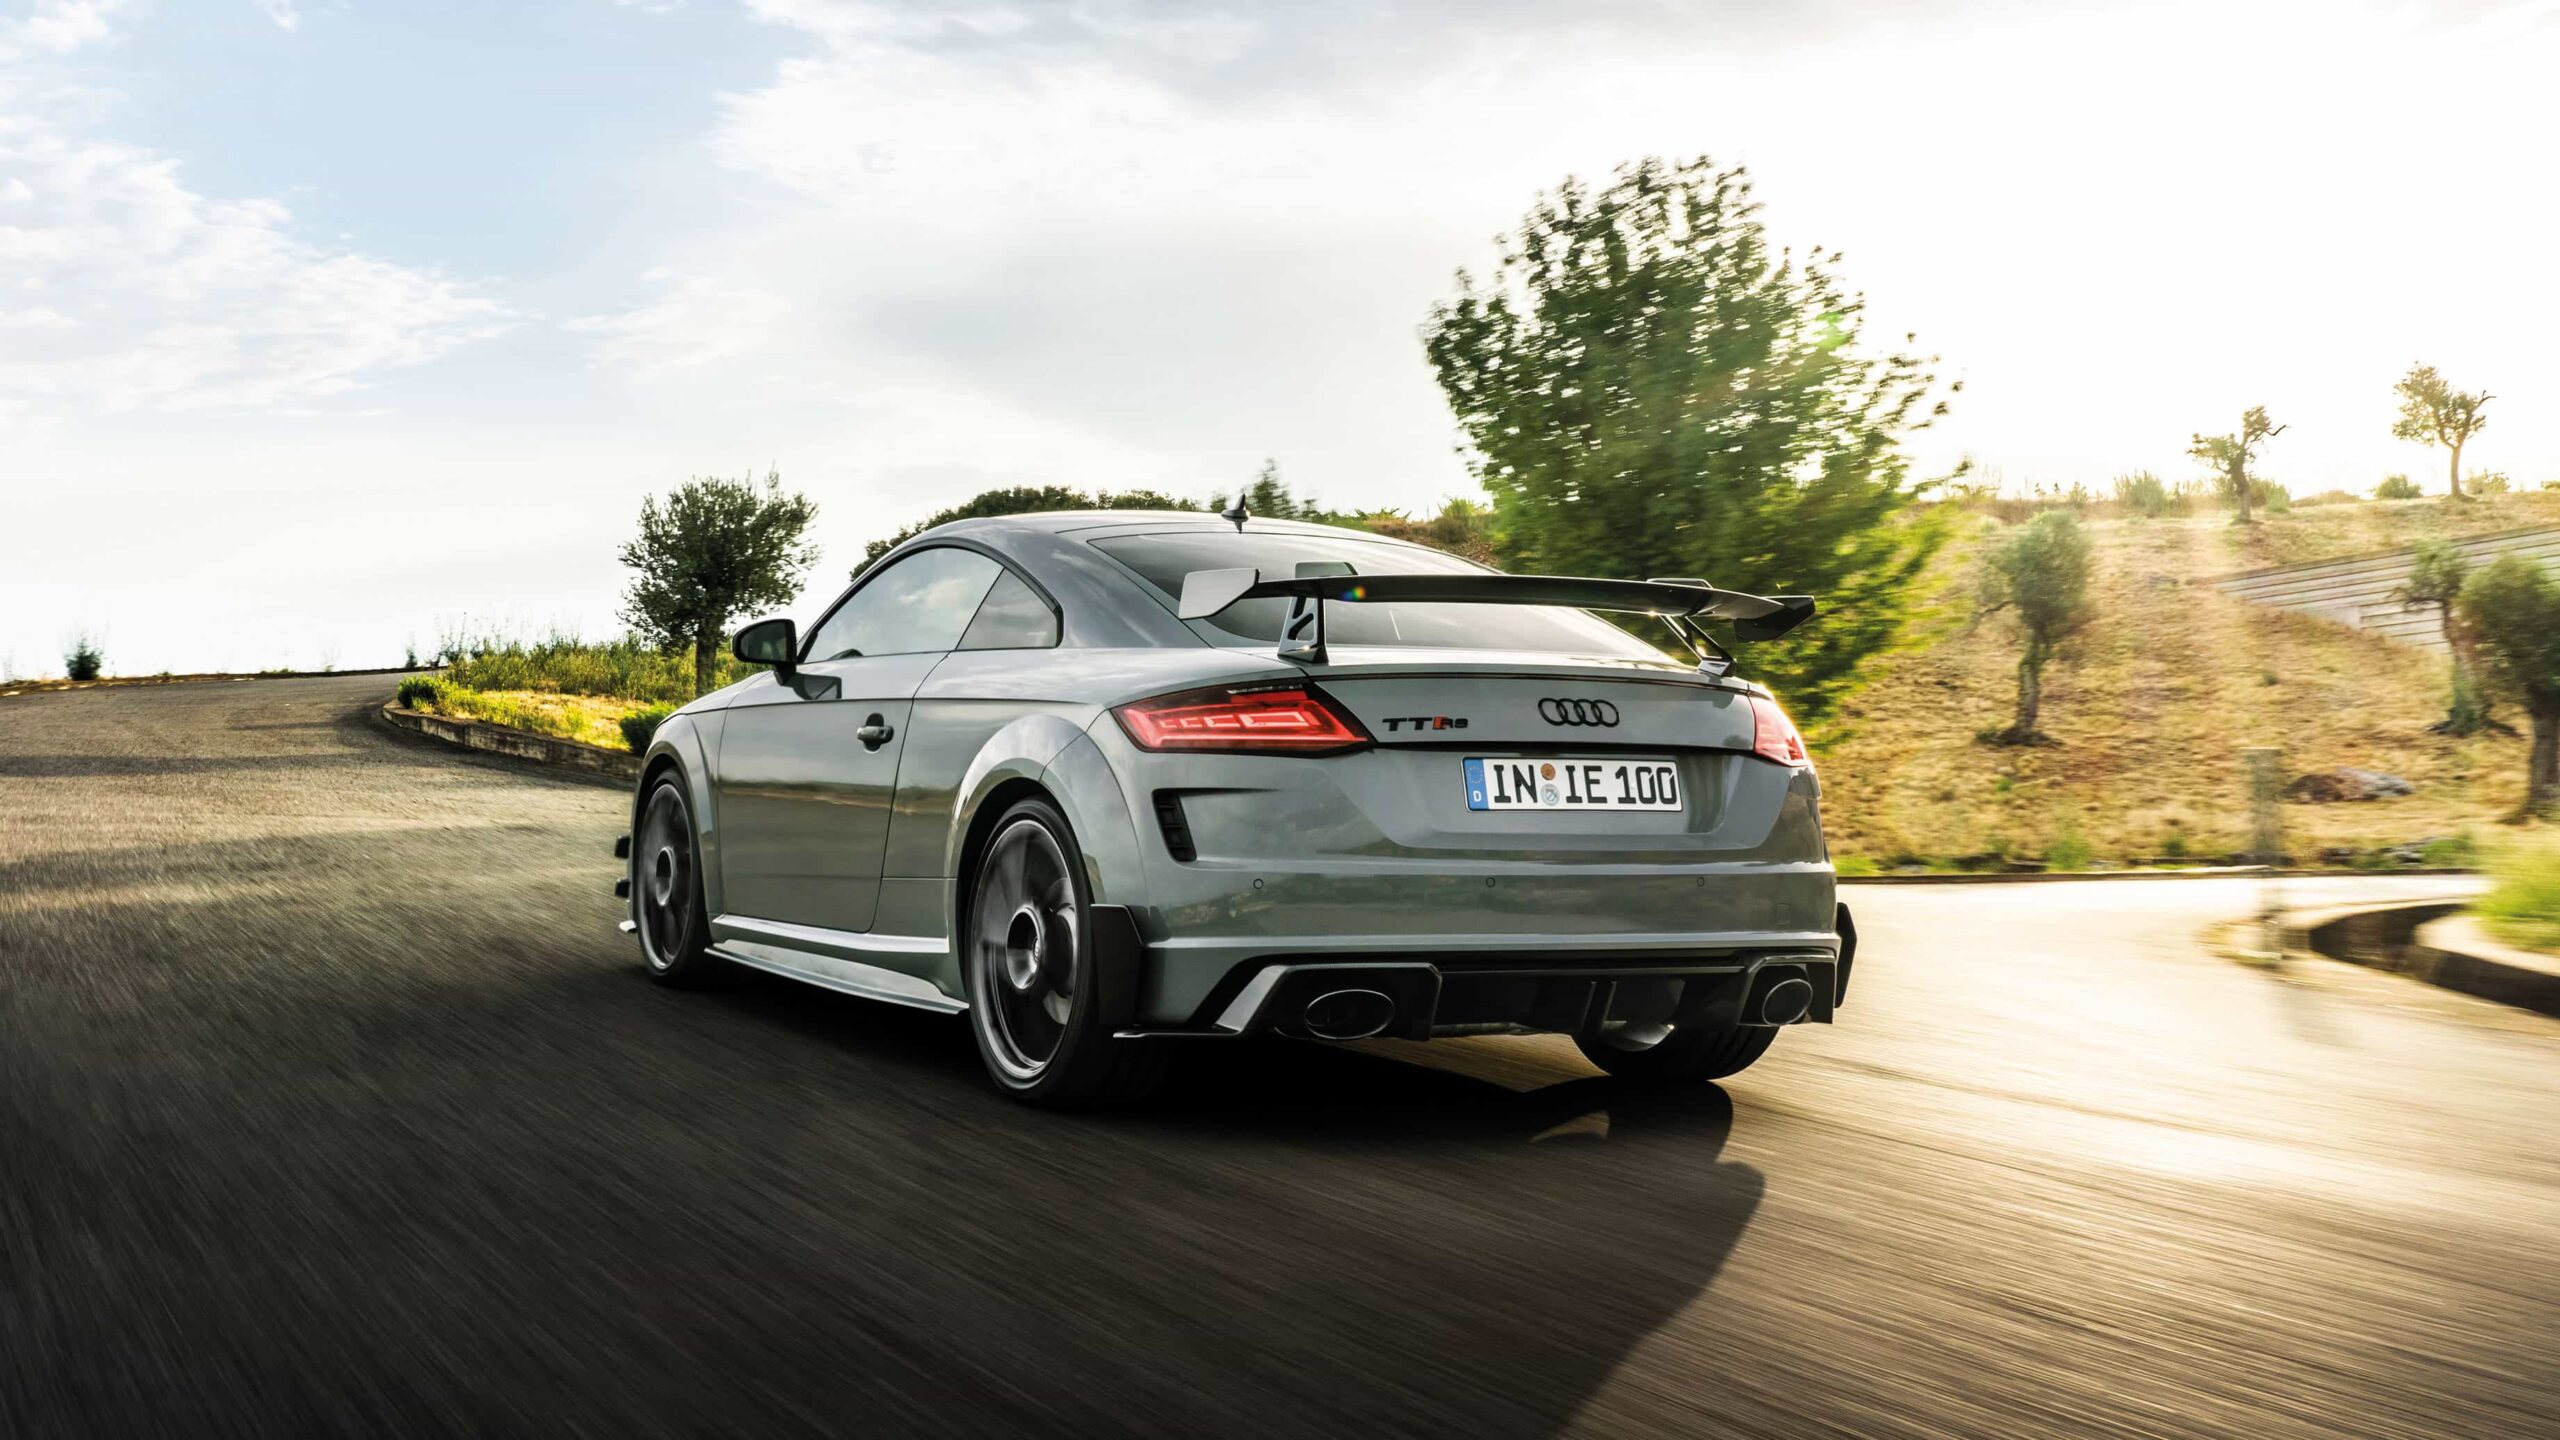 Audi TT RS Iconic Edition review: overpriced model no fitting